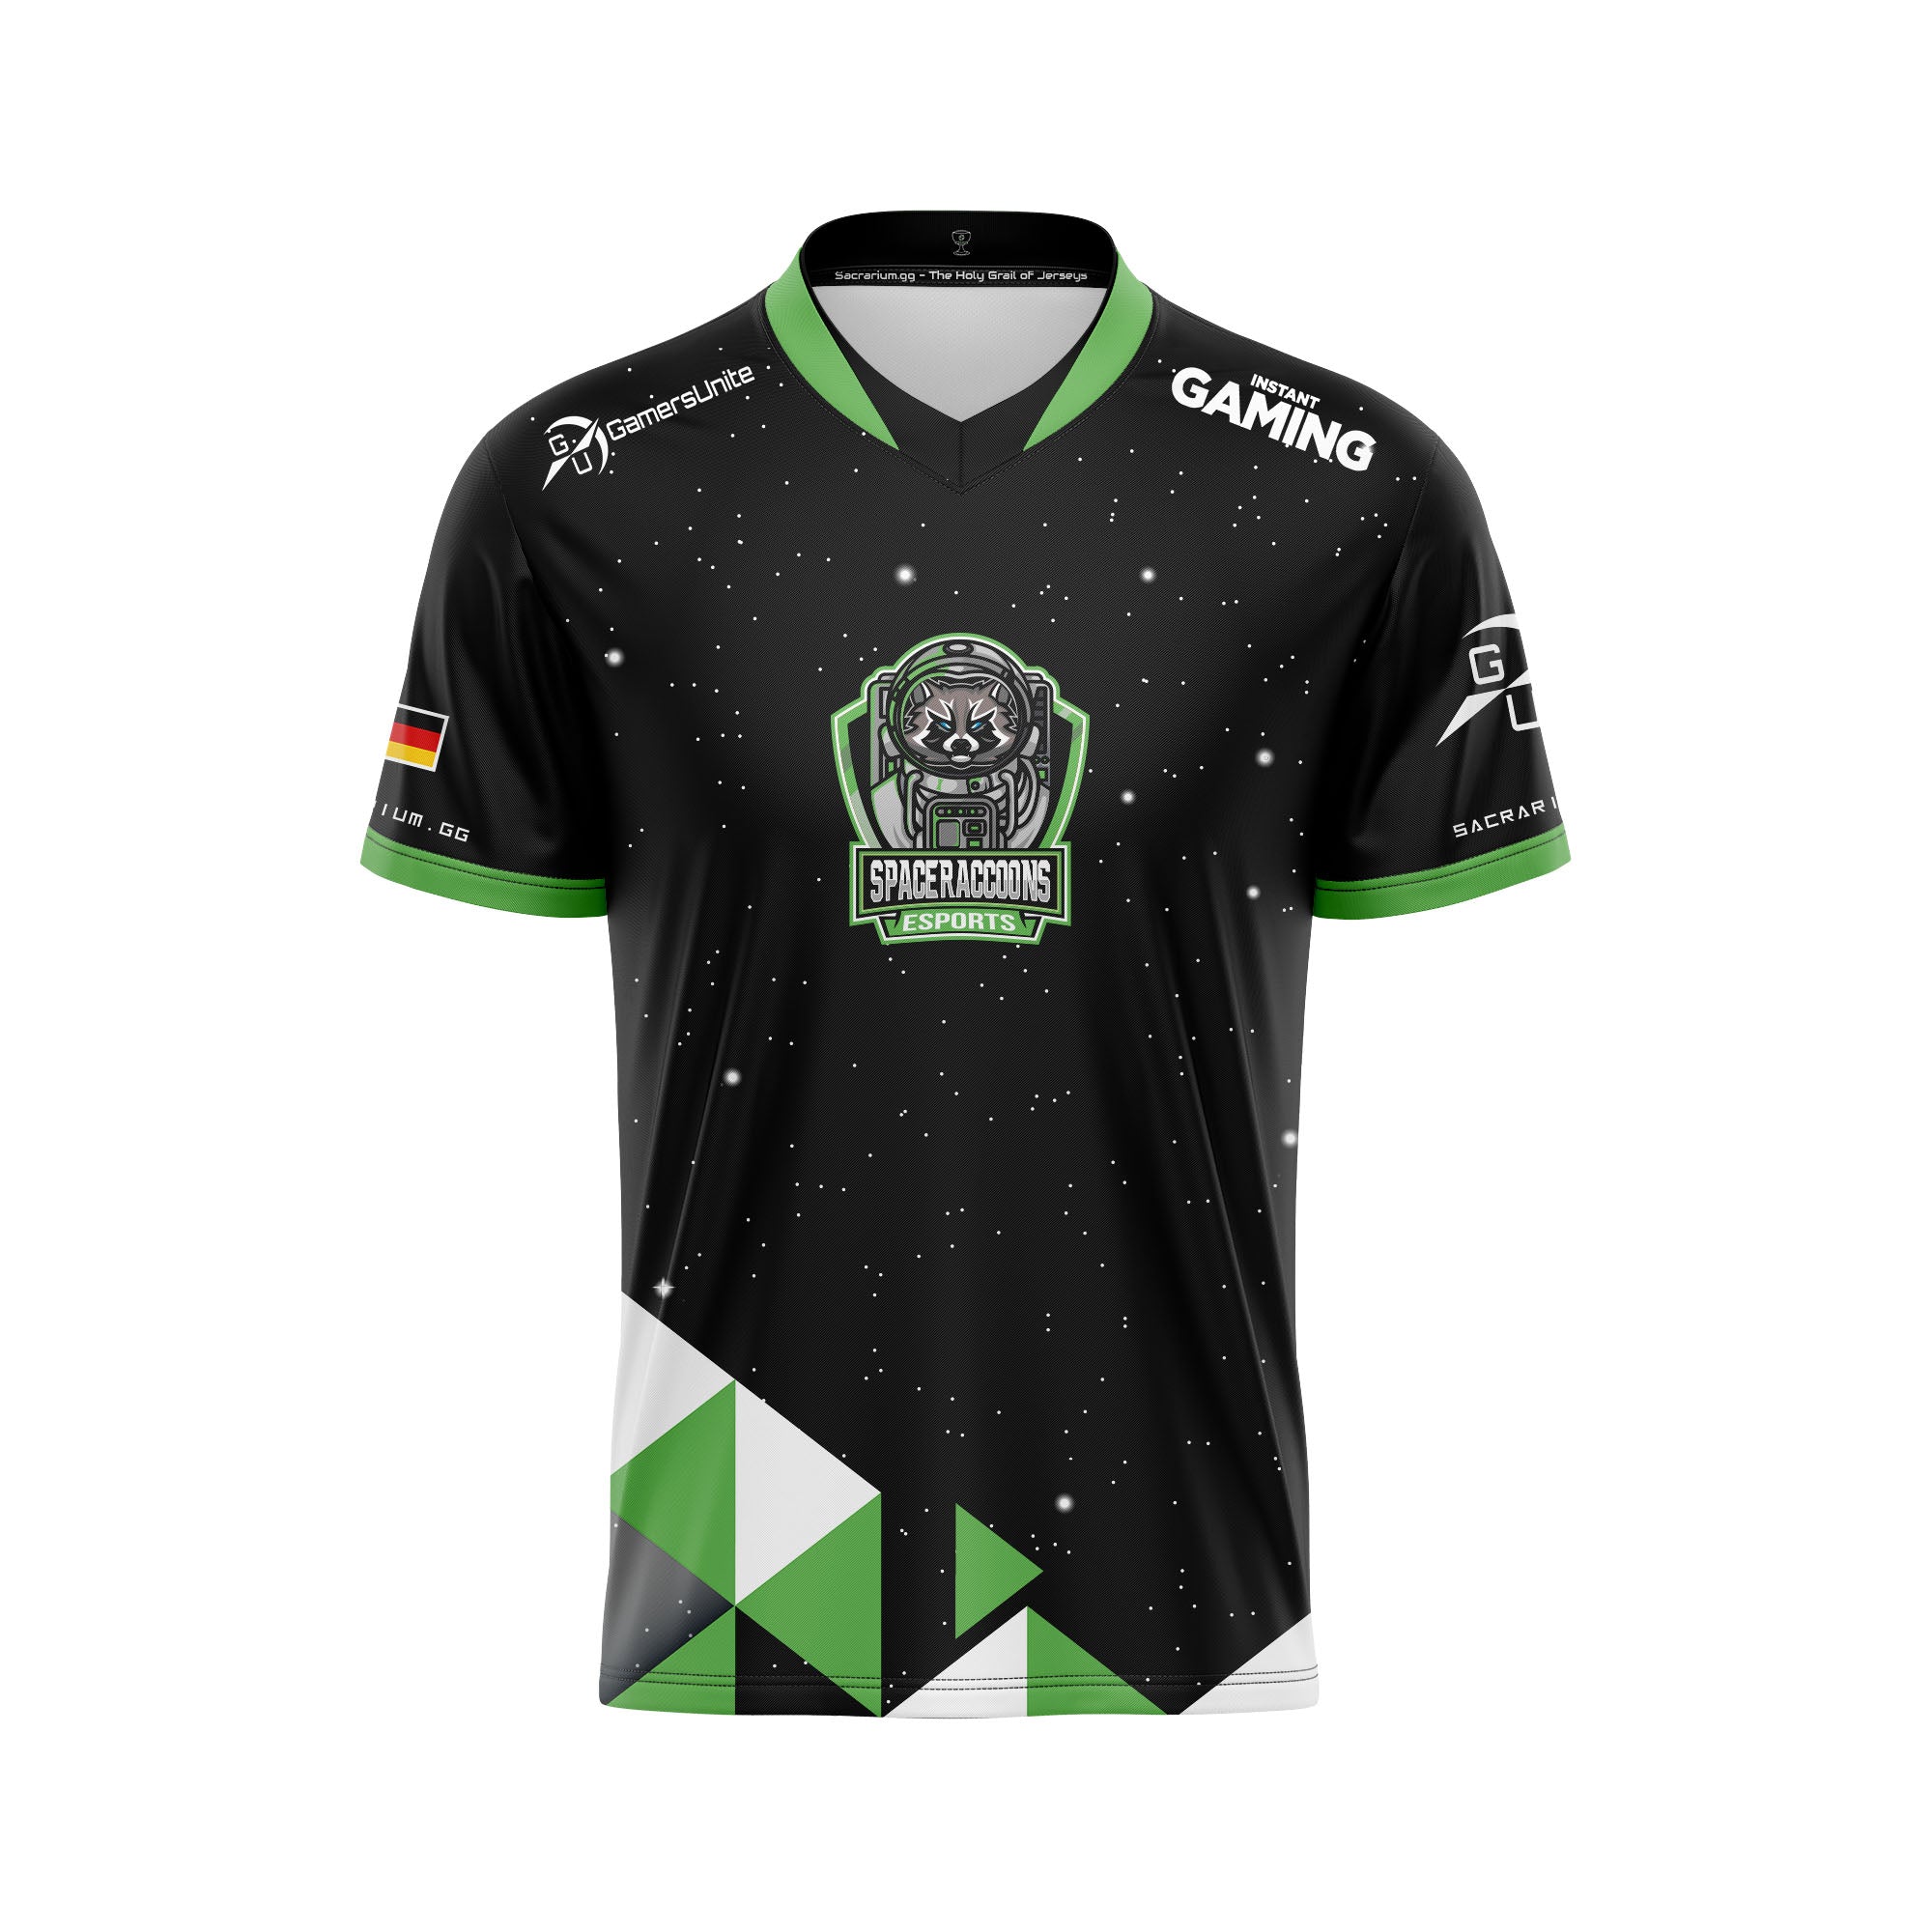 SpaceRaccoons eSports Jersey